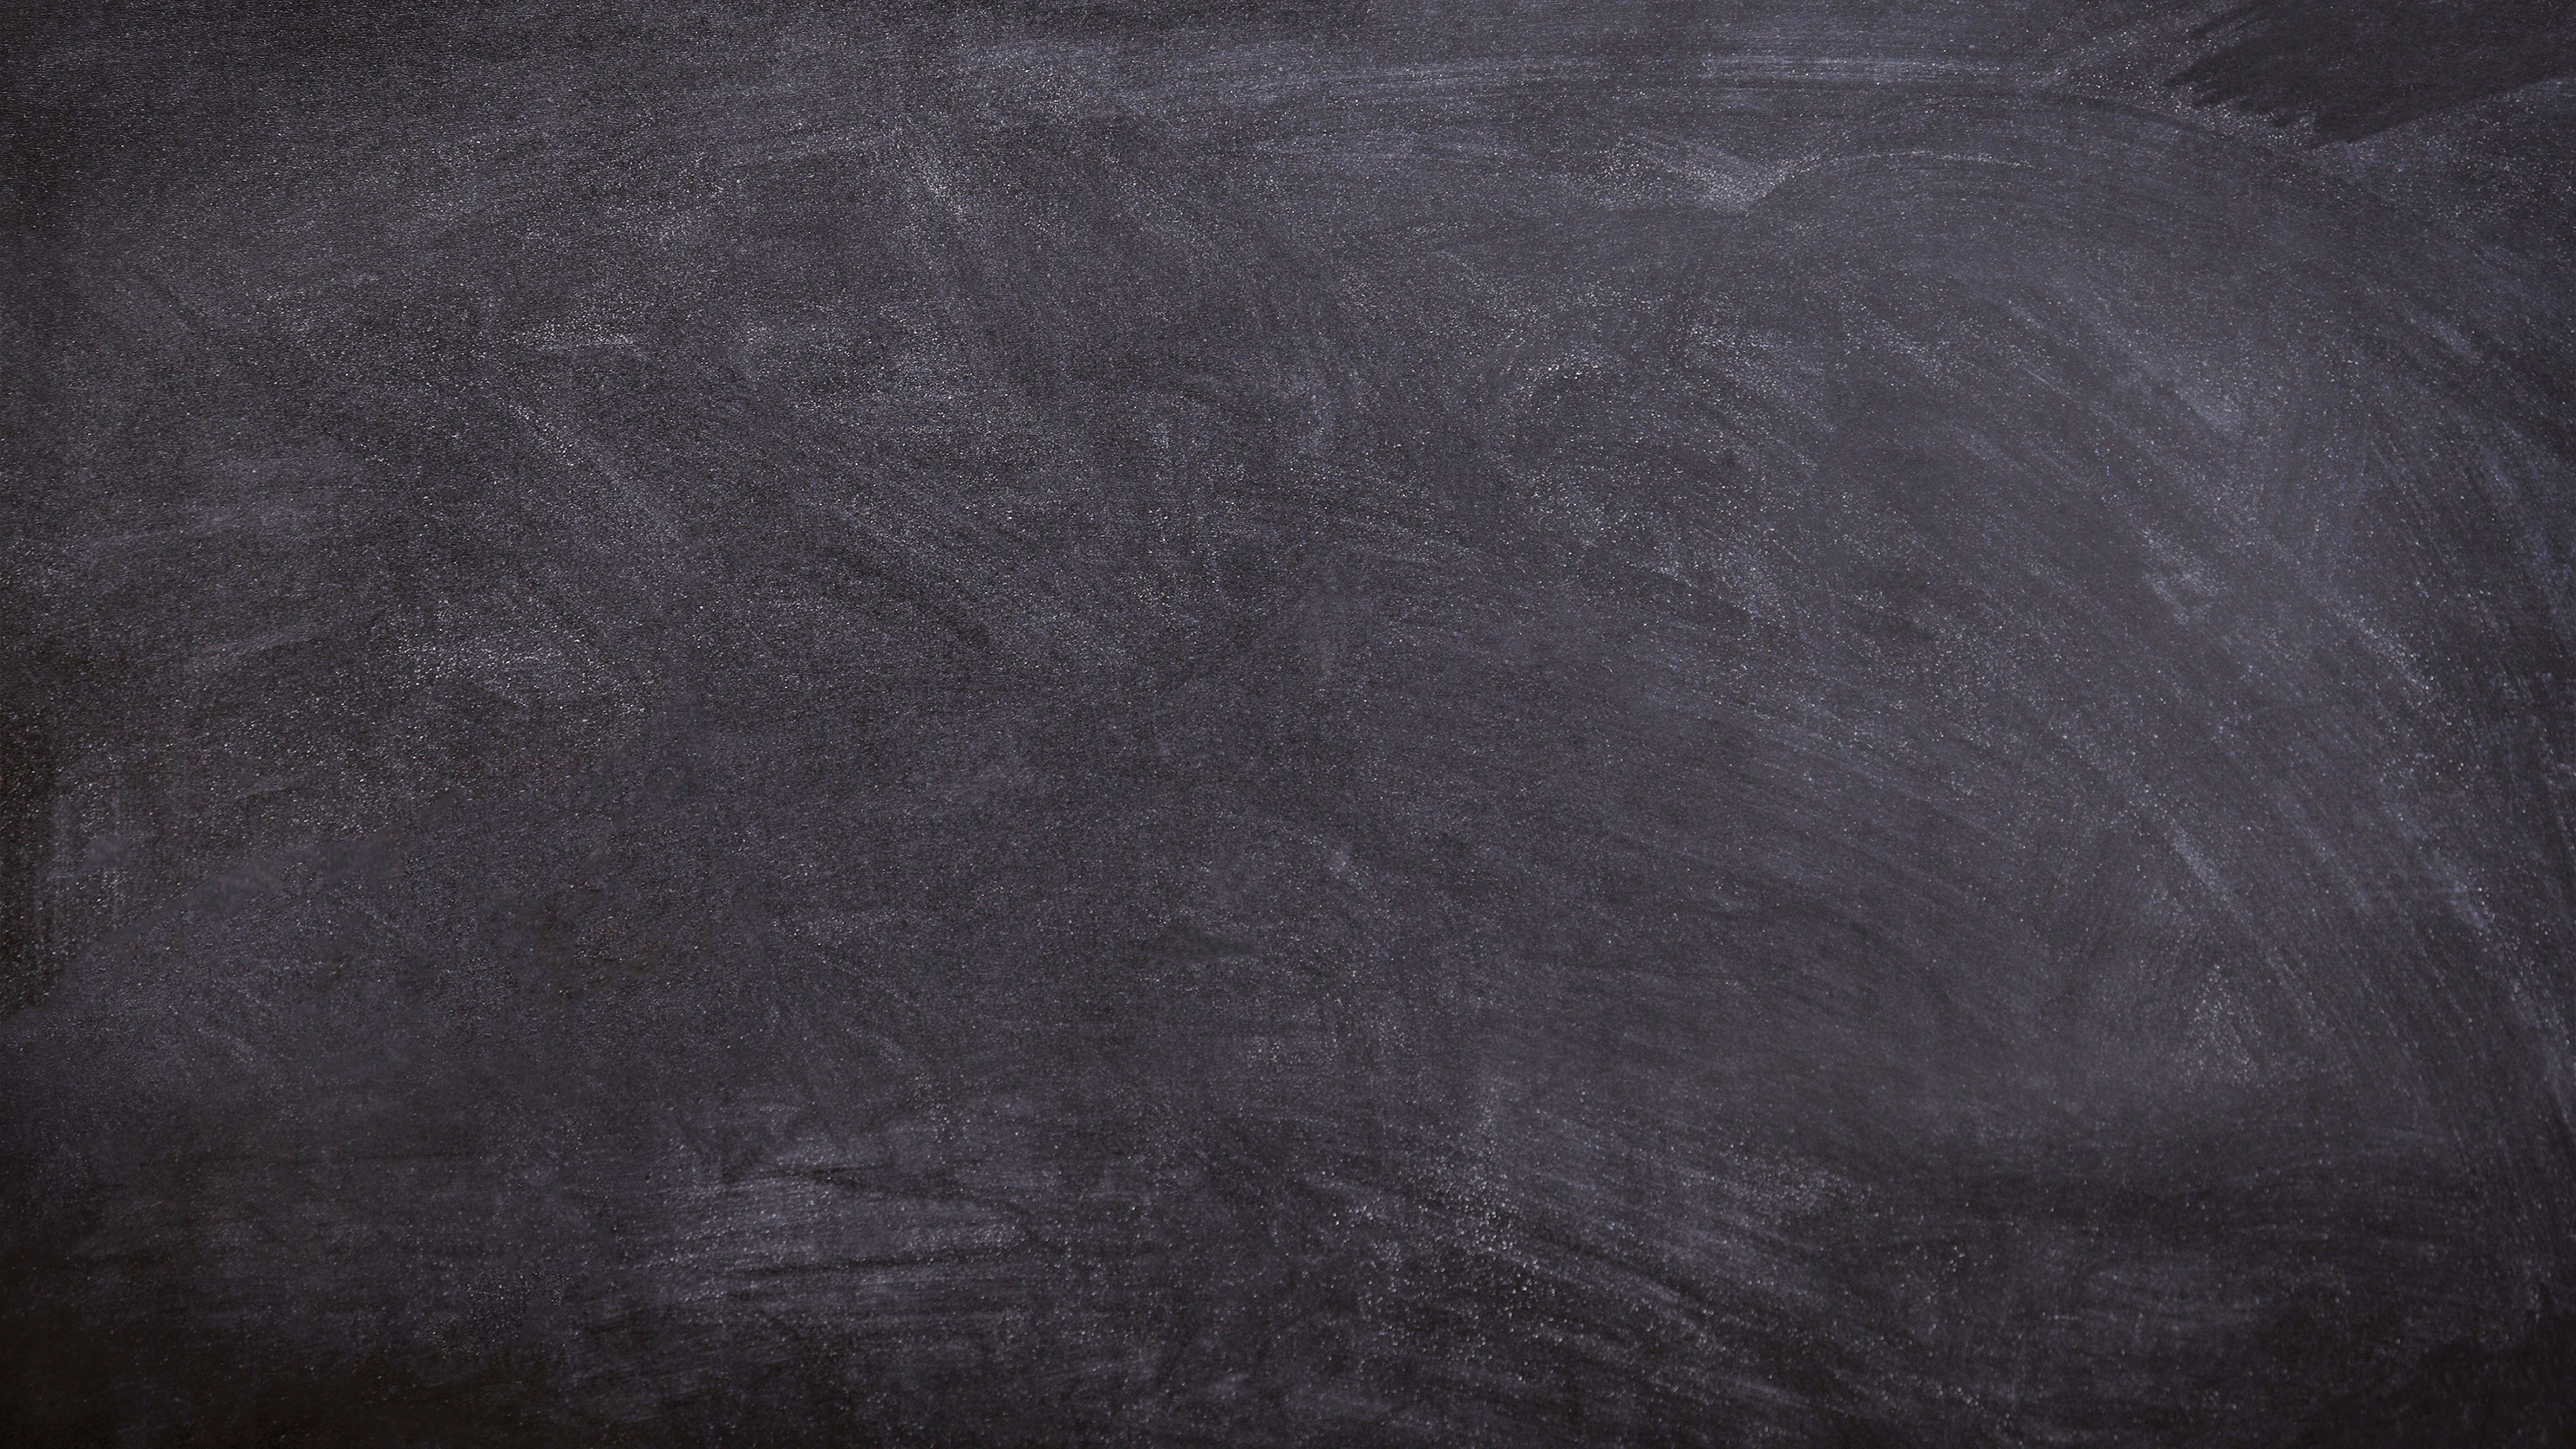 Free Chalkboard Chromebook Wallpaper Ready For Download HD Wallpapers Download Free Map Images Wallpaper [wallpaper376.blogspot.com]